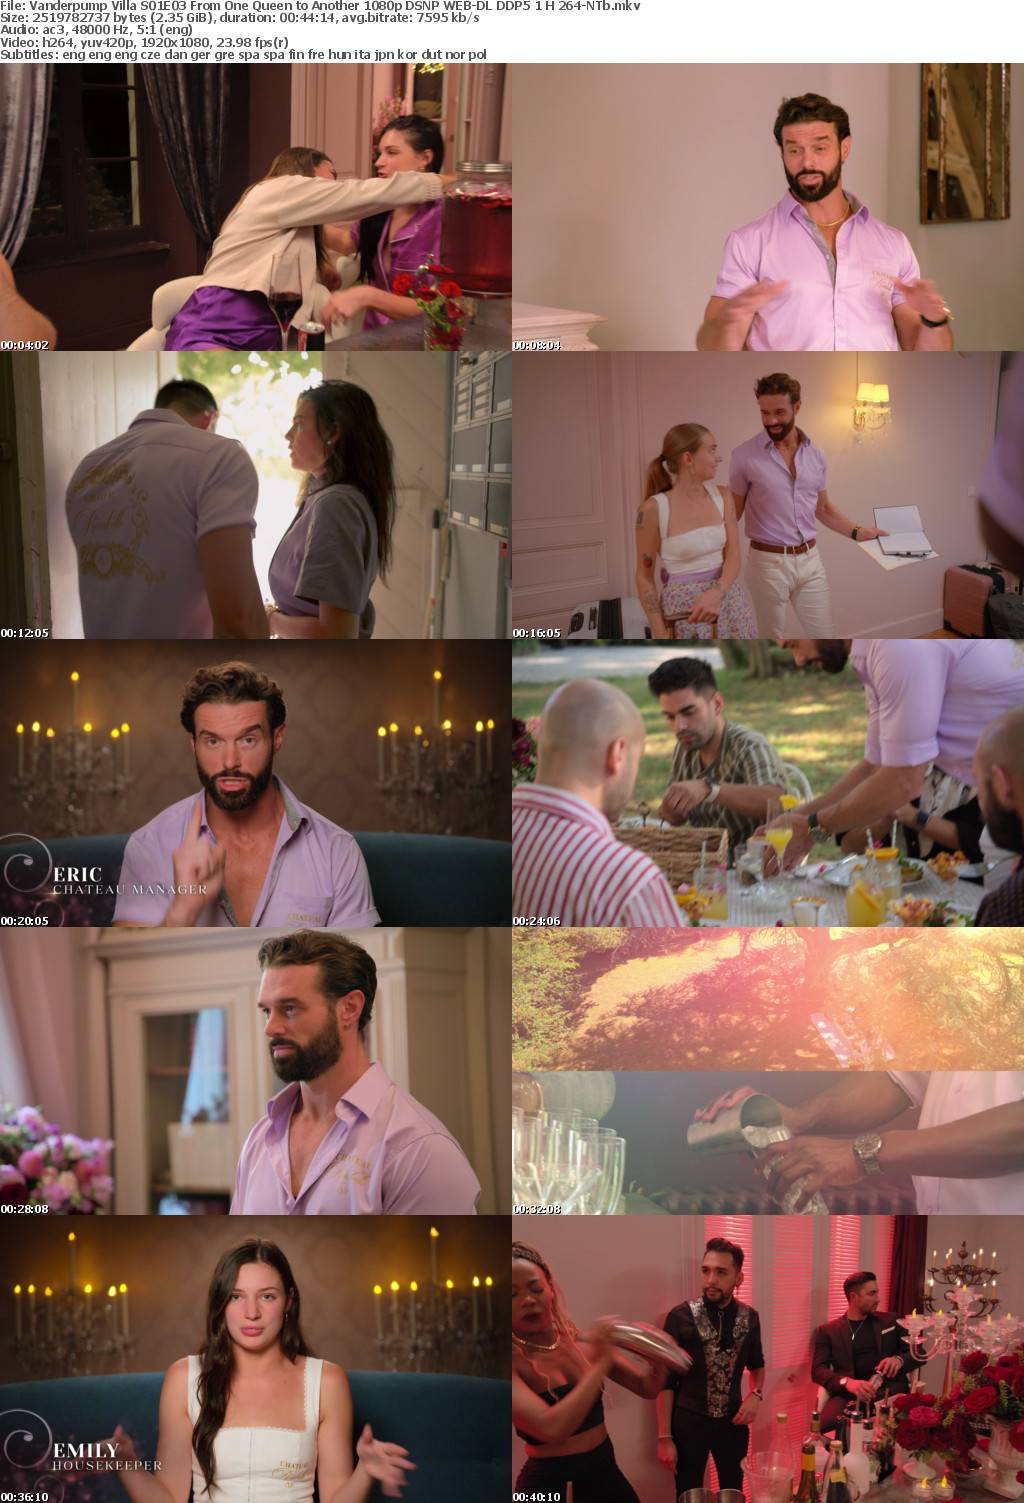 Vanderpump Villa S01E03 From One Queen to Another 1080p DSNP WEB-DL DDP5 1 H 264-NTb